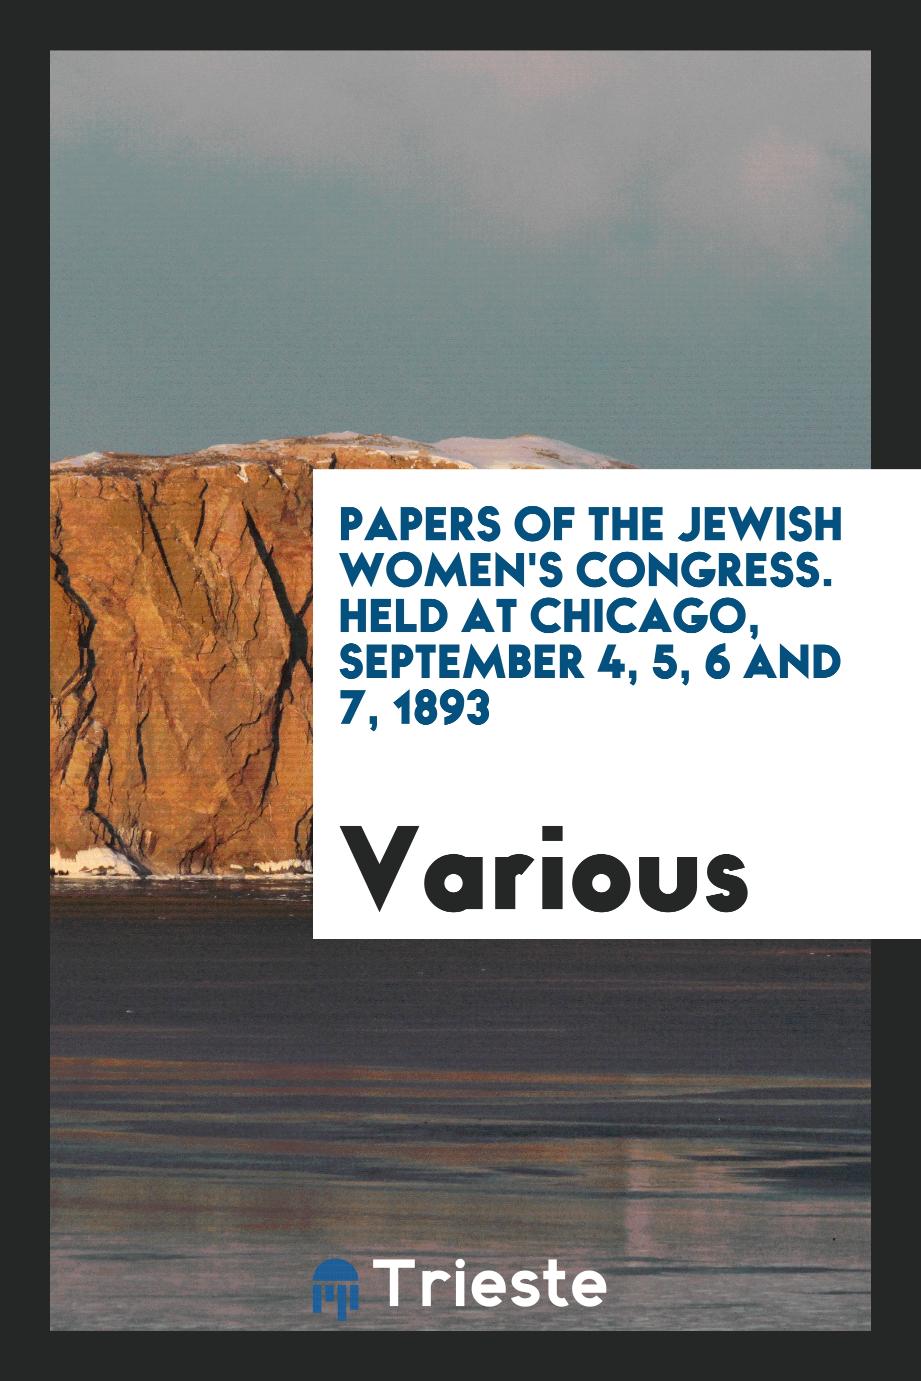 Papers of the Jewish Women's Congress. Held at Chicago, September 4, 5, 6 and 7, 1893